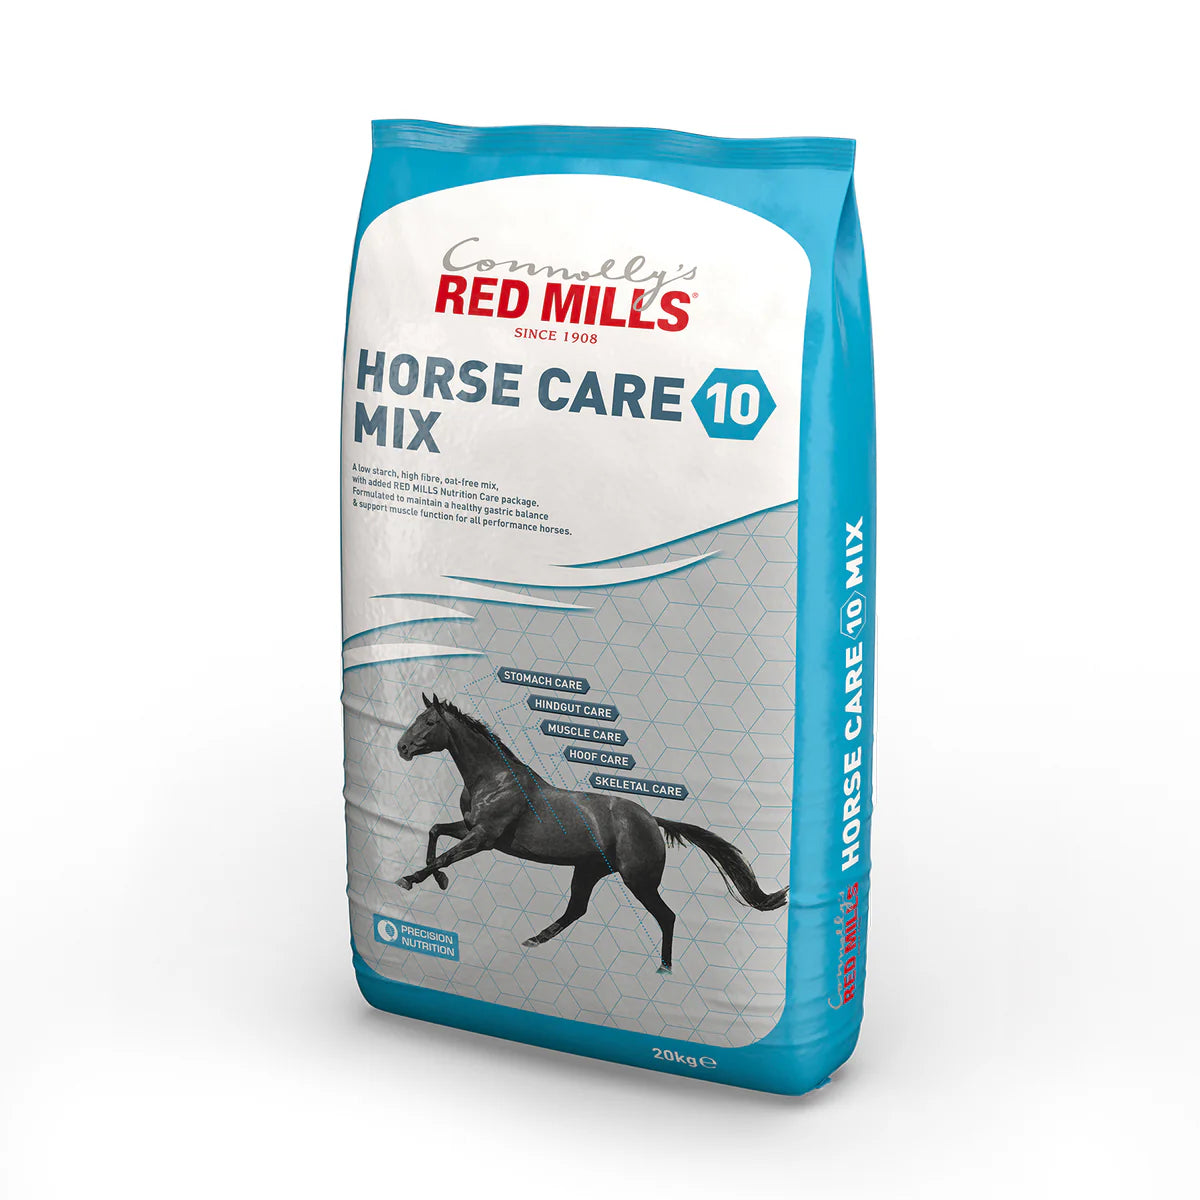 Red Mills Horse Care 10 Mix